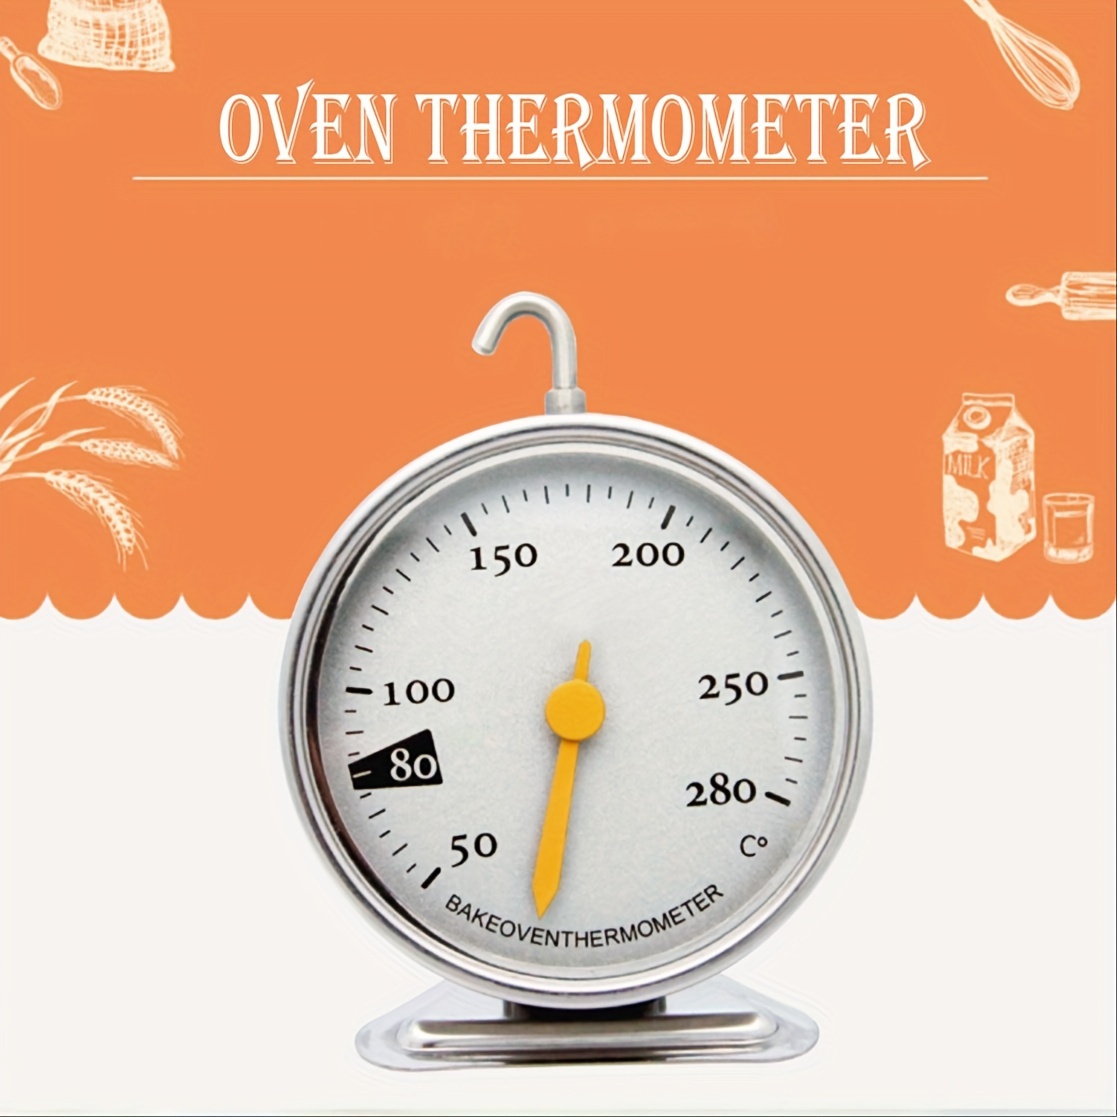 Jeobest Oven Temperature Thermometer - Home Food Meat Stainless Steel  Temperature Stand Up Dial Oven Thermometer Gauge Kitchen Baking Supplies MZ